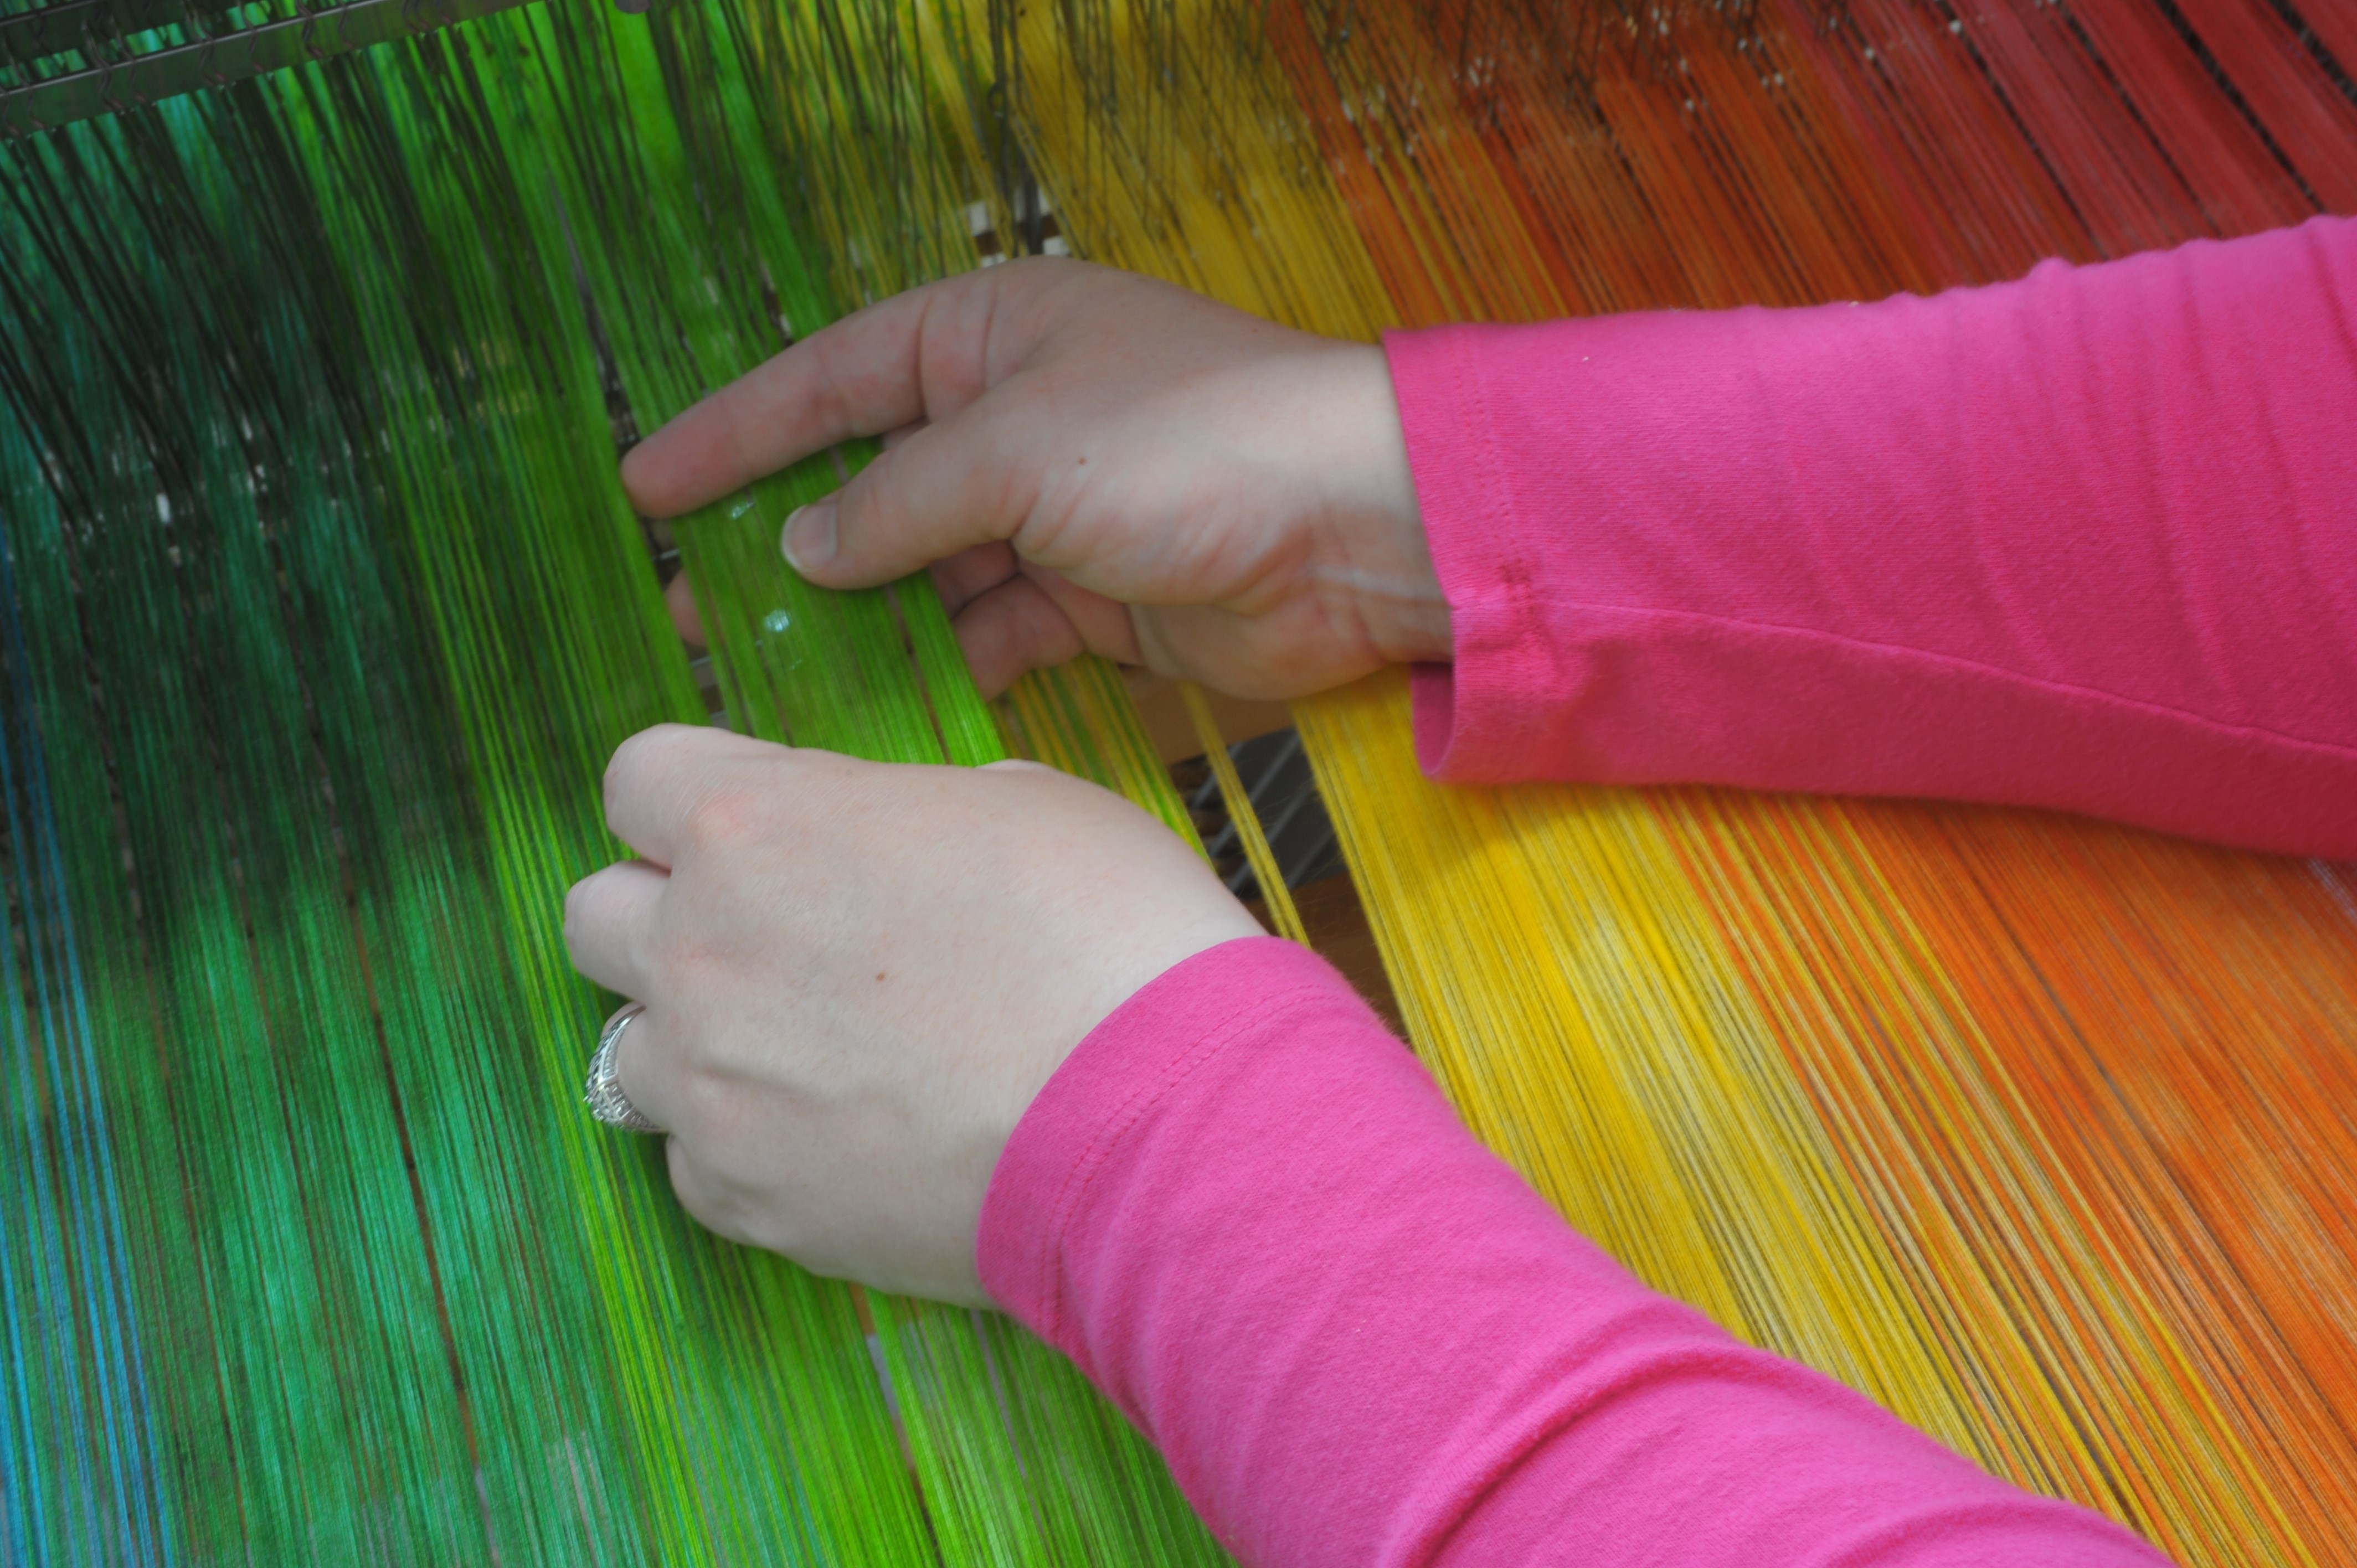 rainbow thread on loom with hands working for weaving